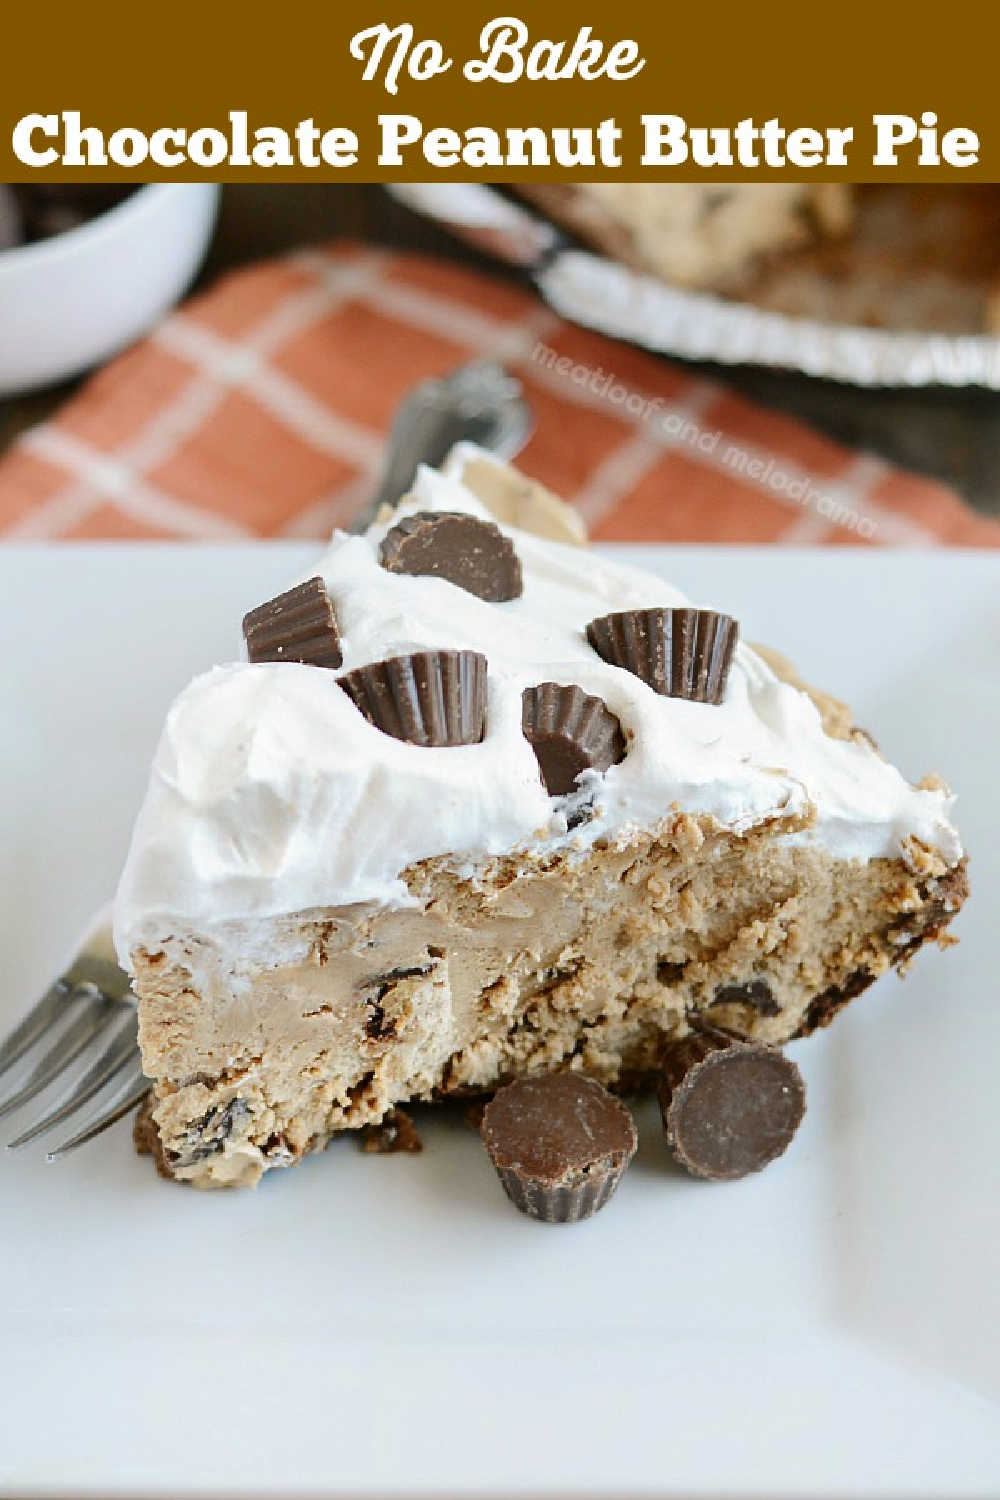 No Bake Chocolate Peanut Butter Pie with creamy peanut butter filling topped with Cool Whip and mini peanut butter cups is an easy no bake dessert. Peanut butter lovers will love this delicious pie! via @meamel